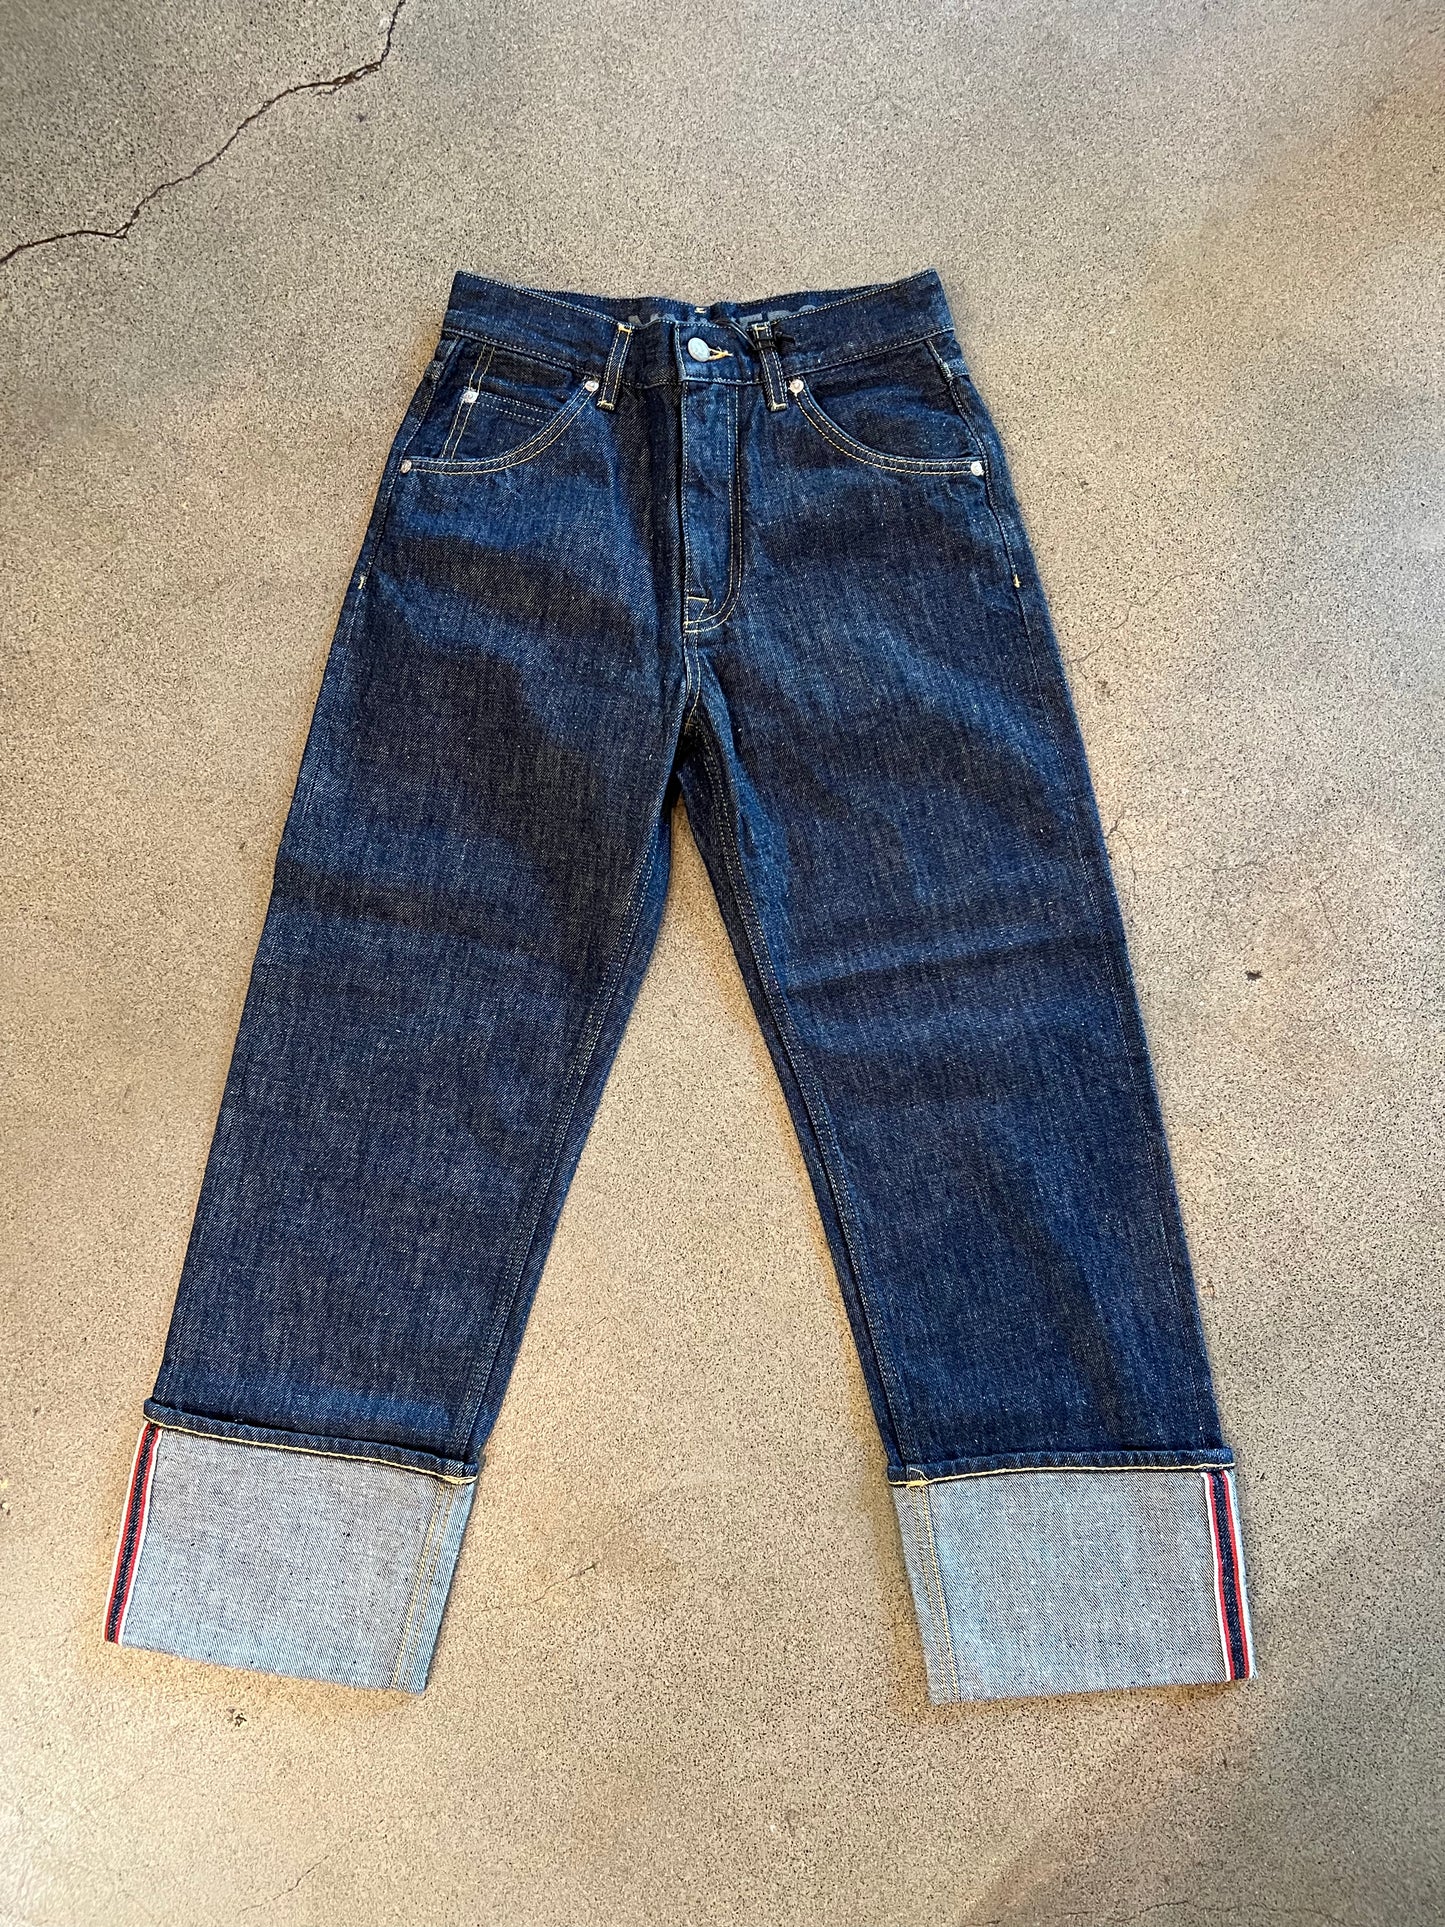 Roy Rogers- Jeans Normale 70th Woman Denim Cimosa Rinse